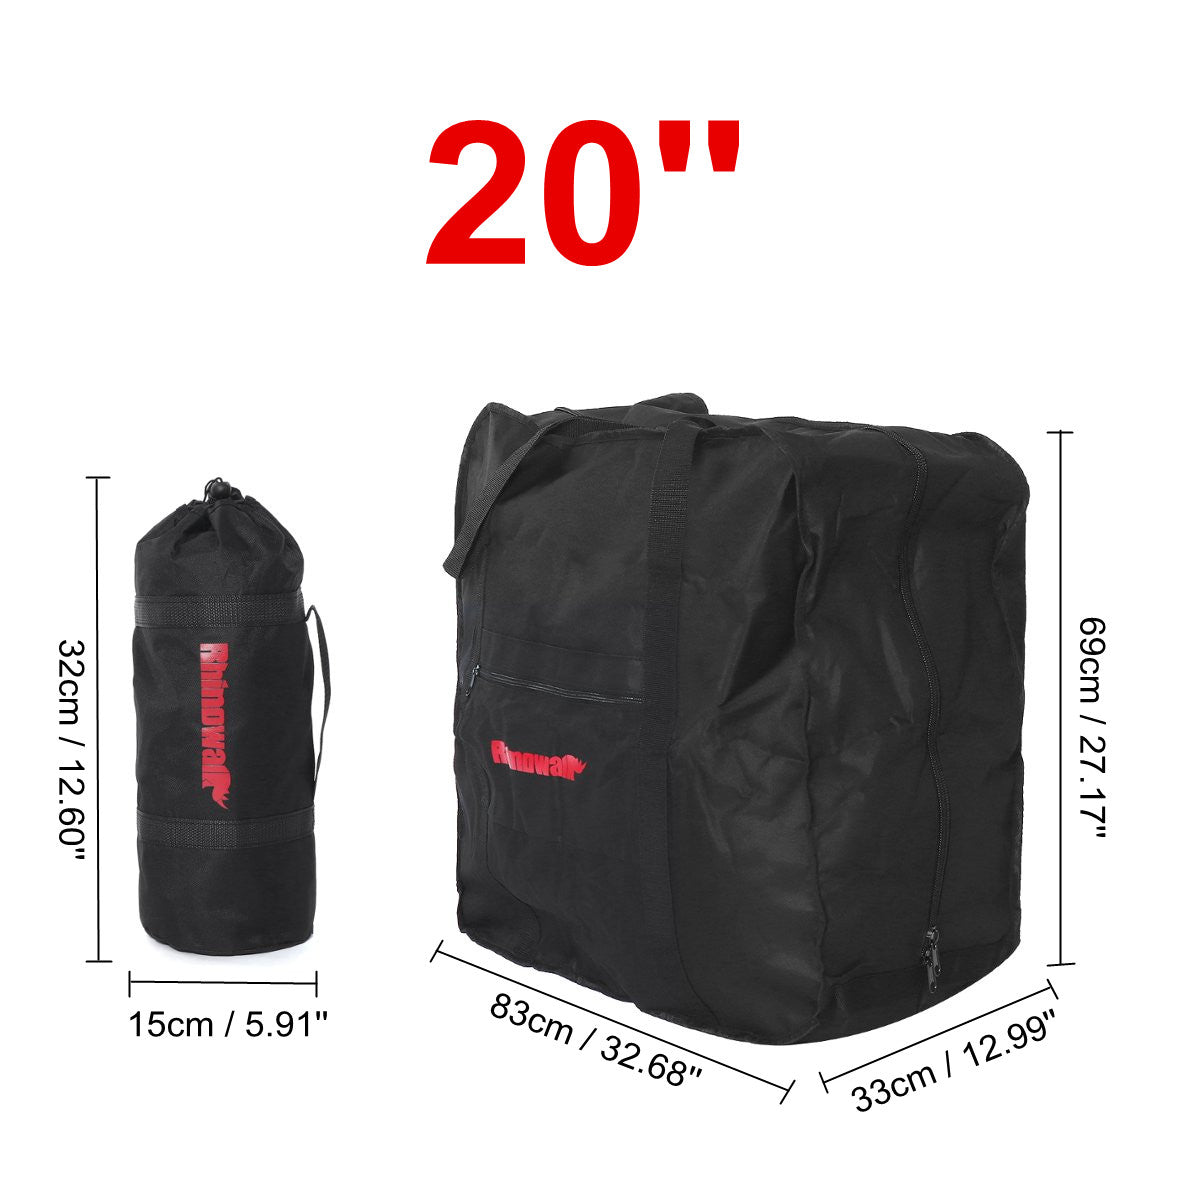 14/16/20inch Folding Bike Bicycle Carrier Bag Carry Transport Travel Pouch Case - Auto GoShop